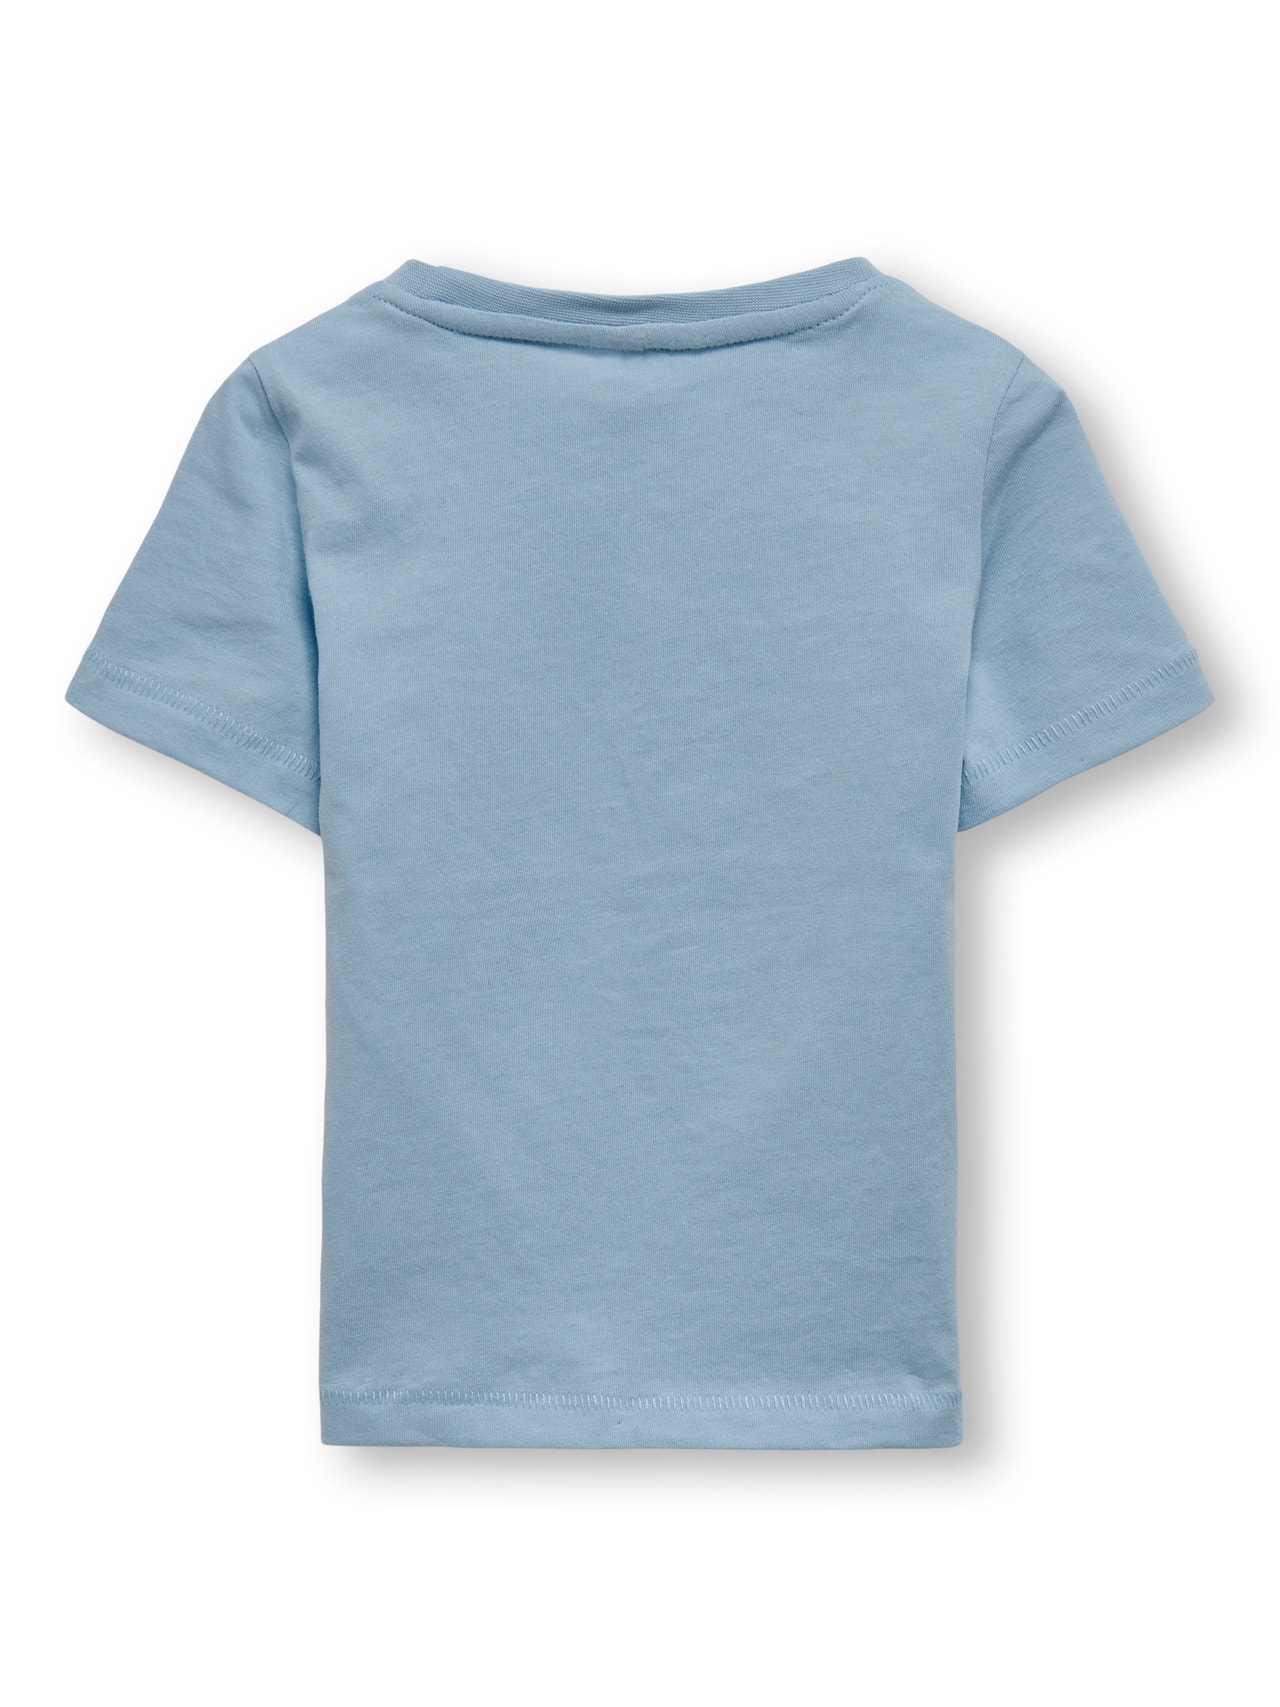 ONLY Mini ONLY-logo T-shirt -Cashmere Blue - 15250807